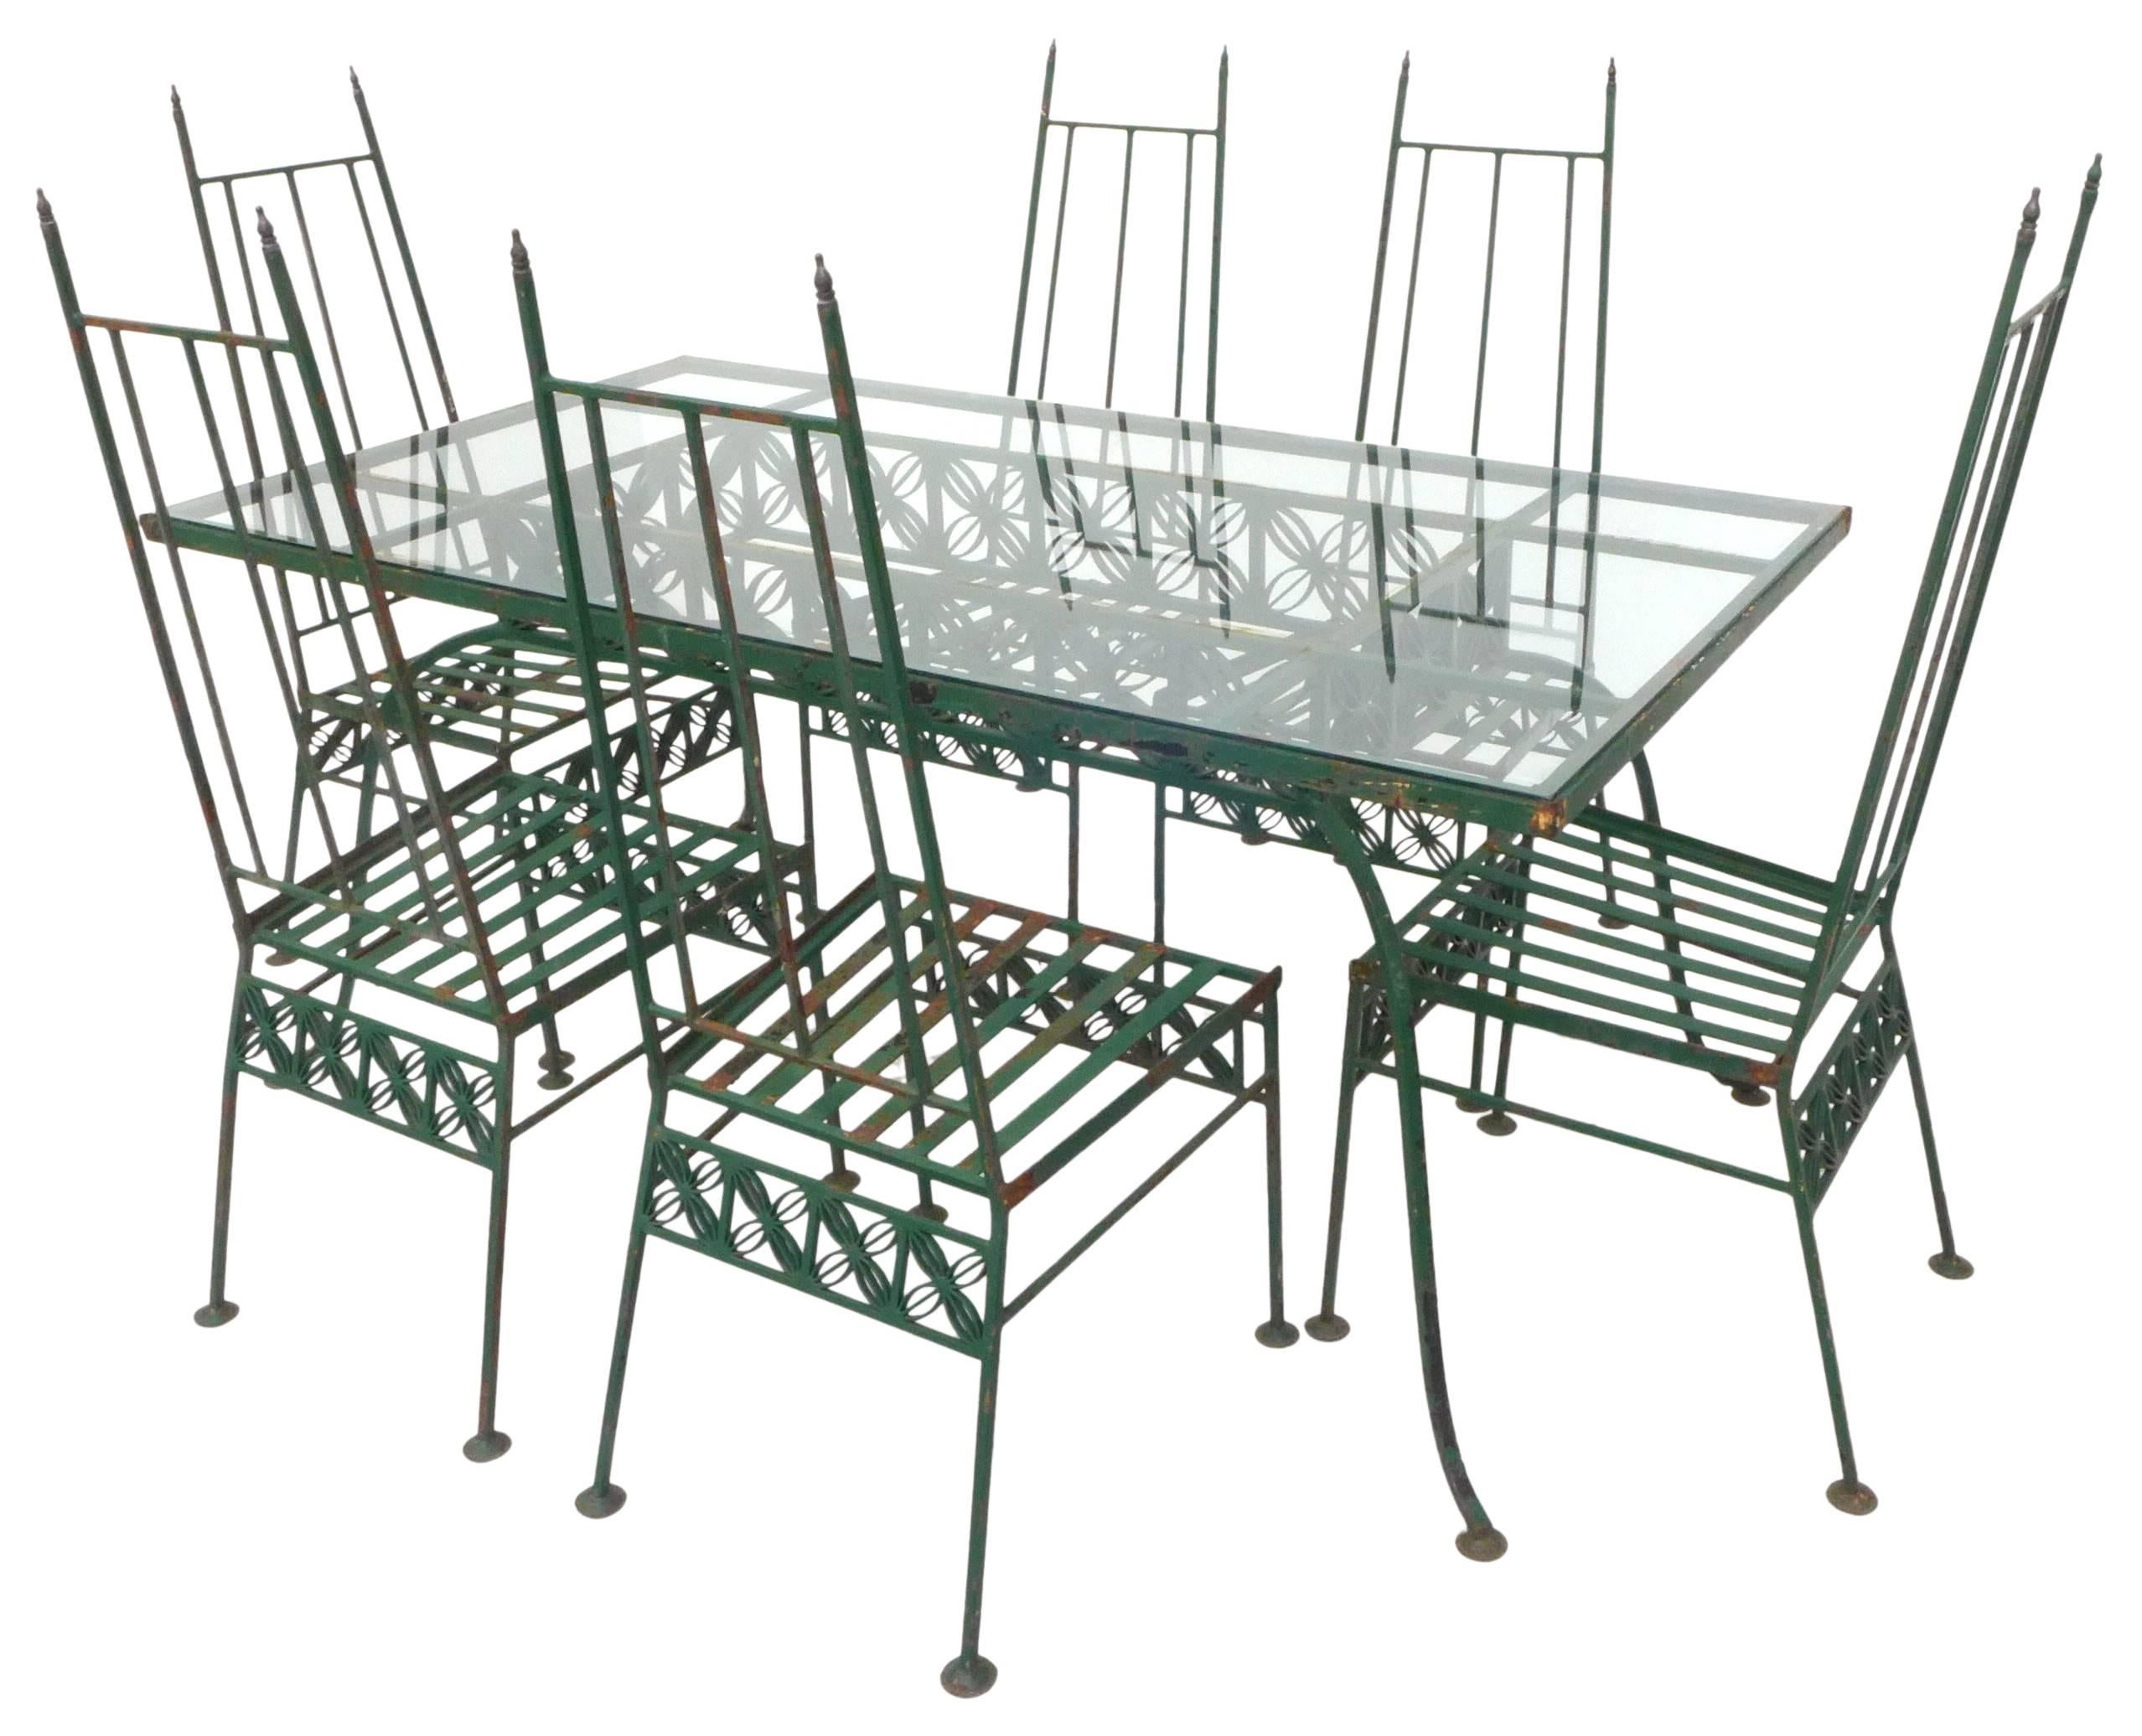 An incredible outdoor dining set for six in wrought iron and glass. A striking group with repeating, graphic, floral details stretched across each piece. High-back chairs sporting brass finials and disc feet. Painted in green with occasional